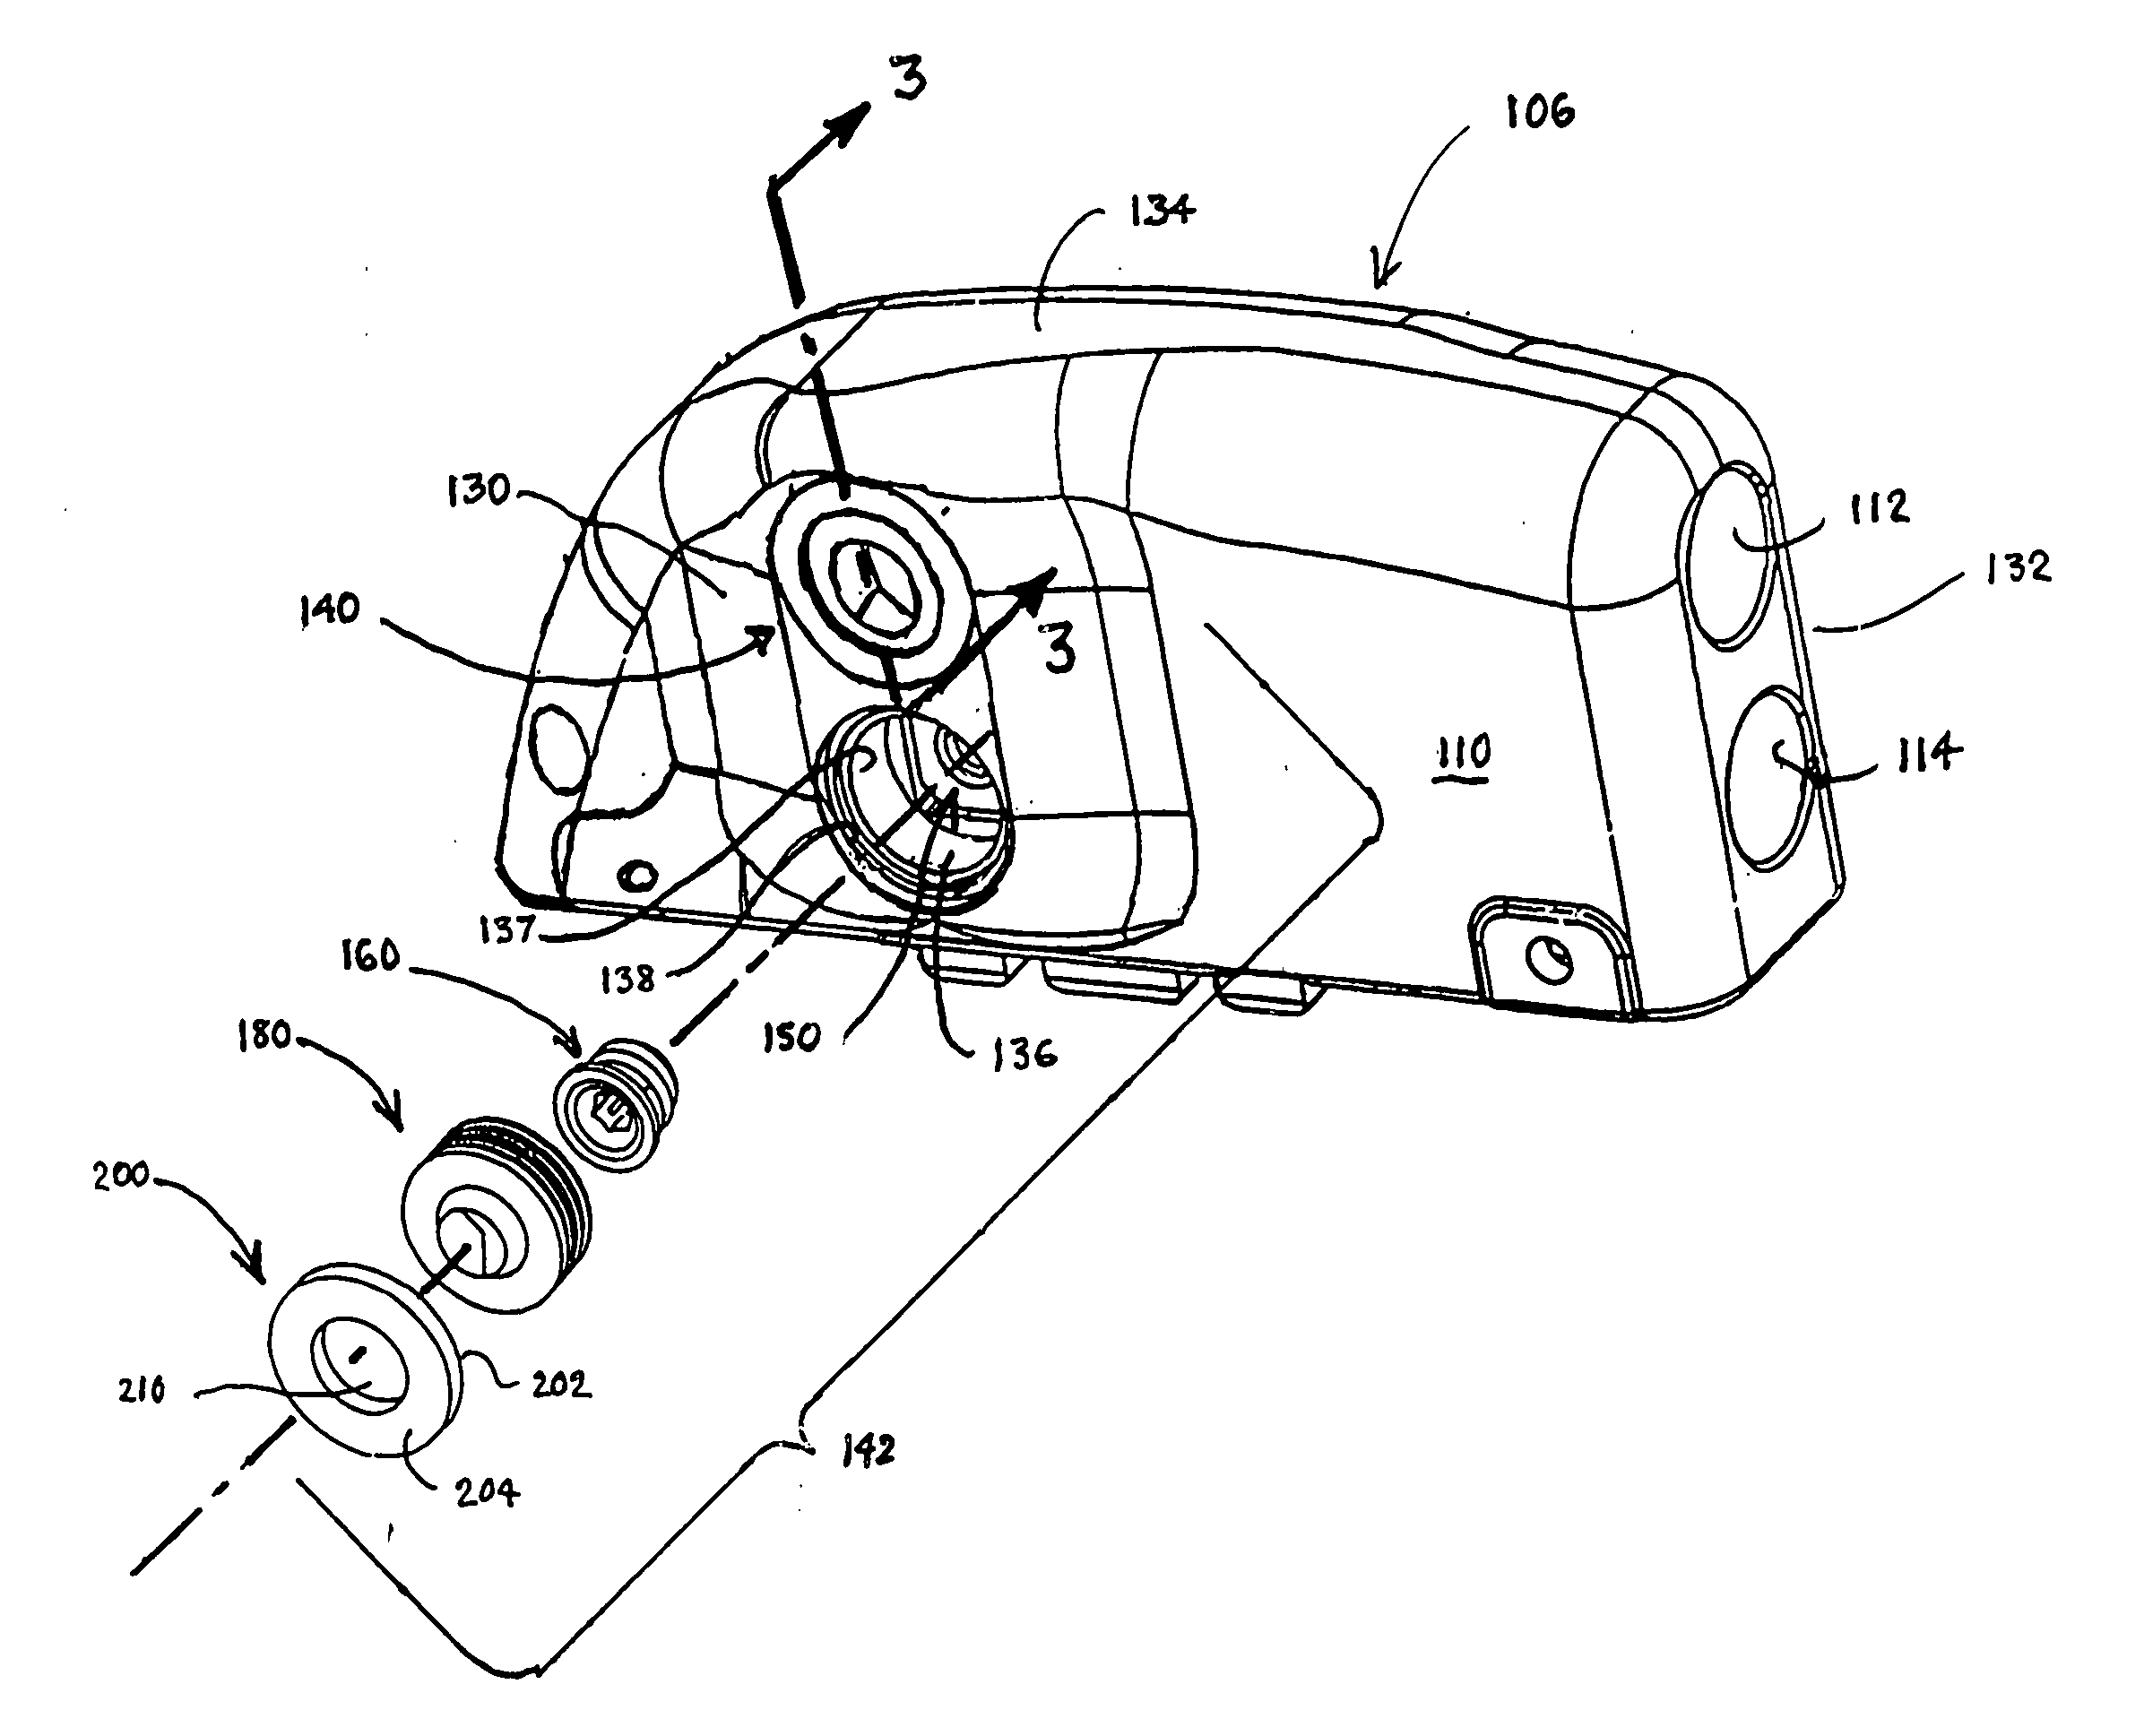 Connector header grommet for an implantable medical device